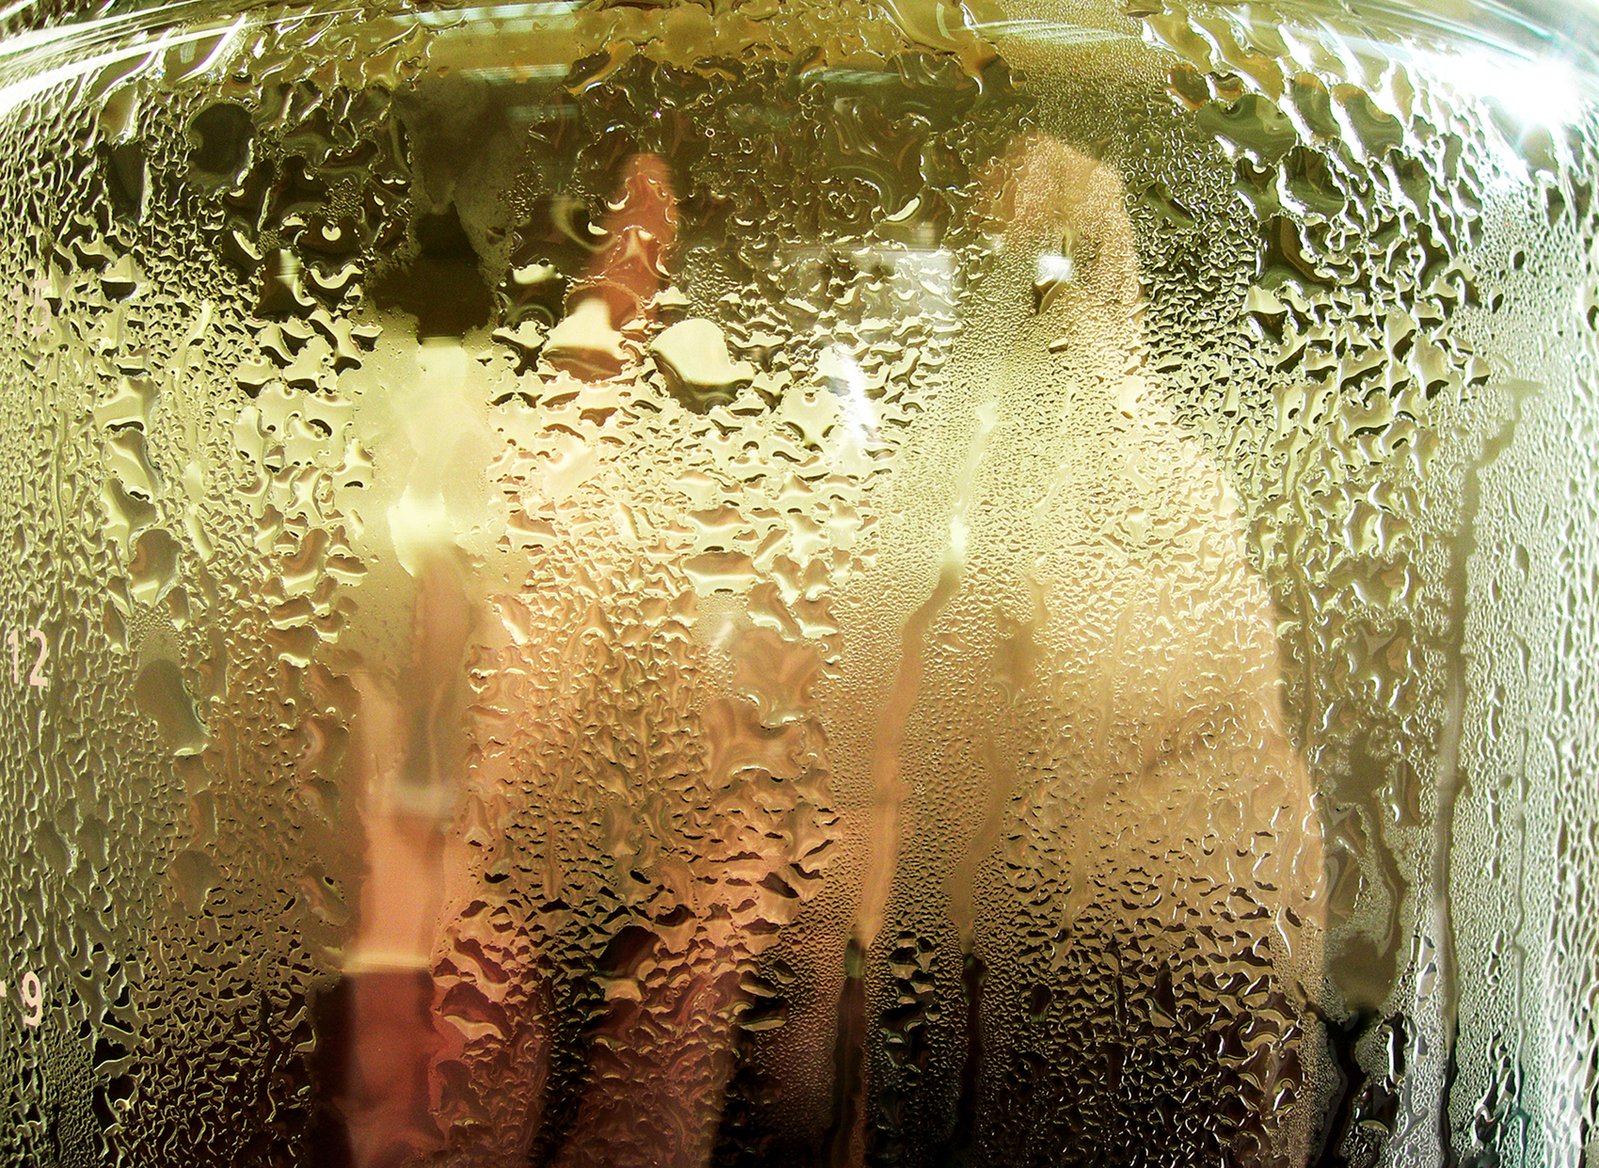 water running down a glass window, with a blurry background